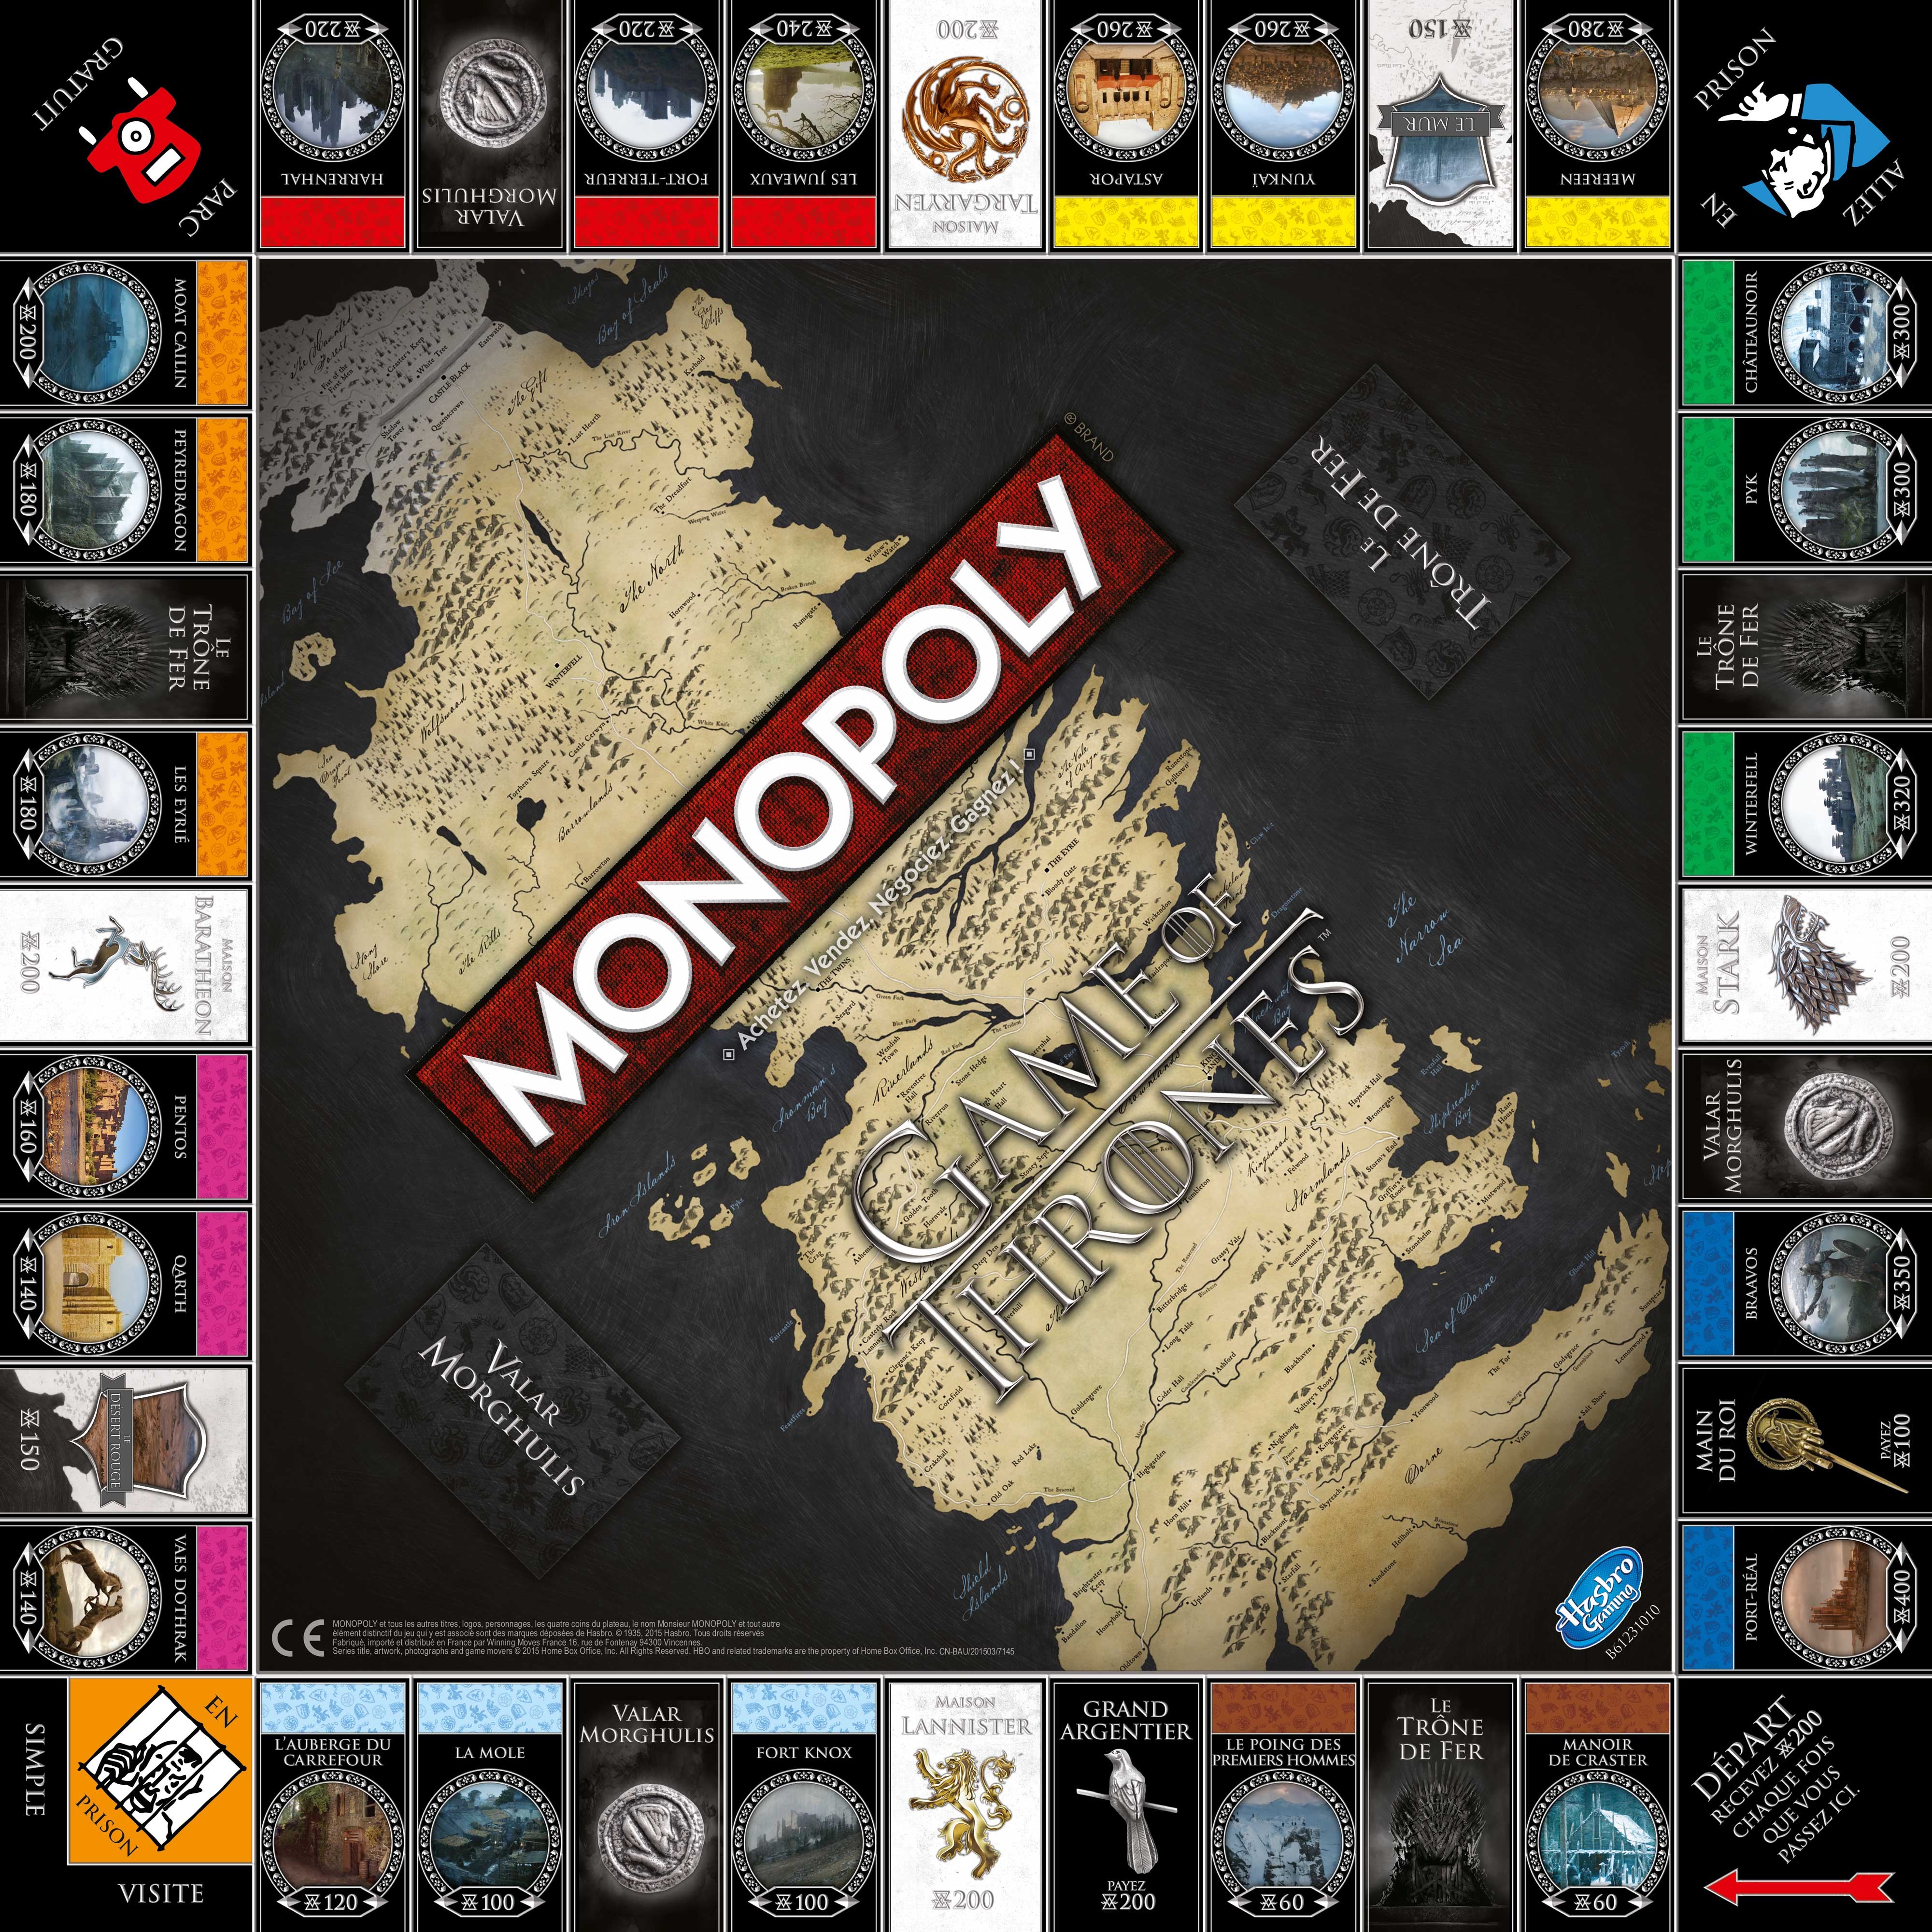 Plateau du Monopoly Game of Thrones